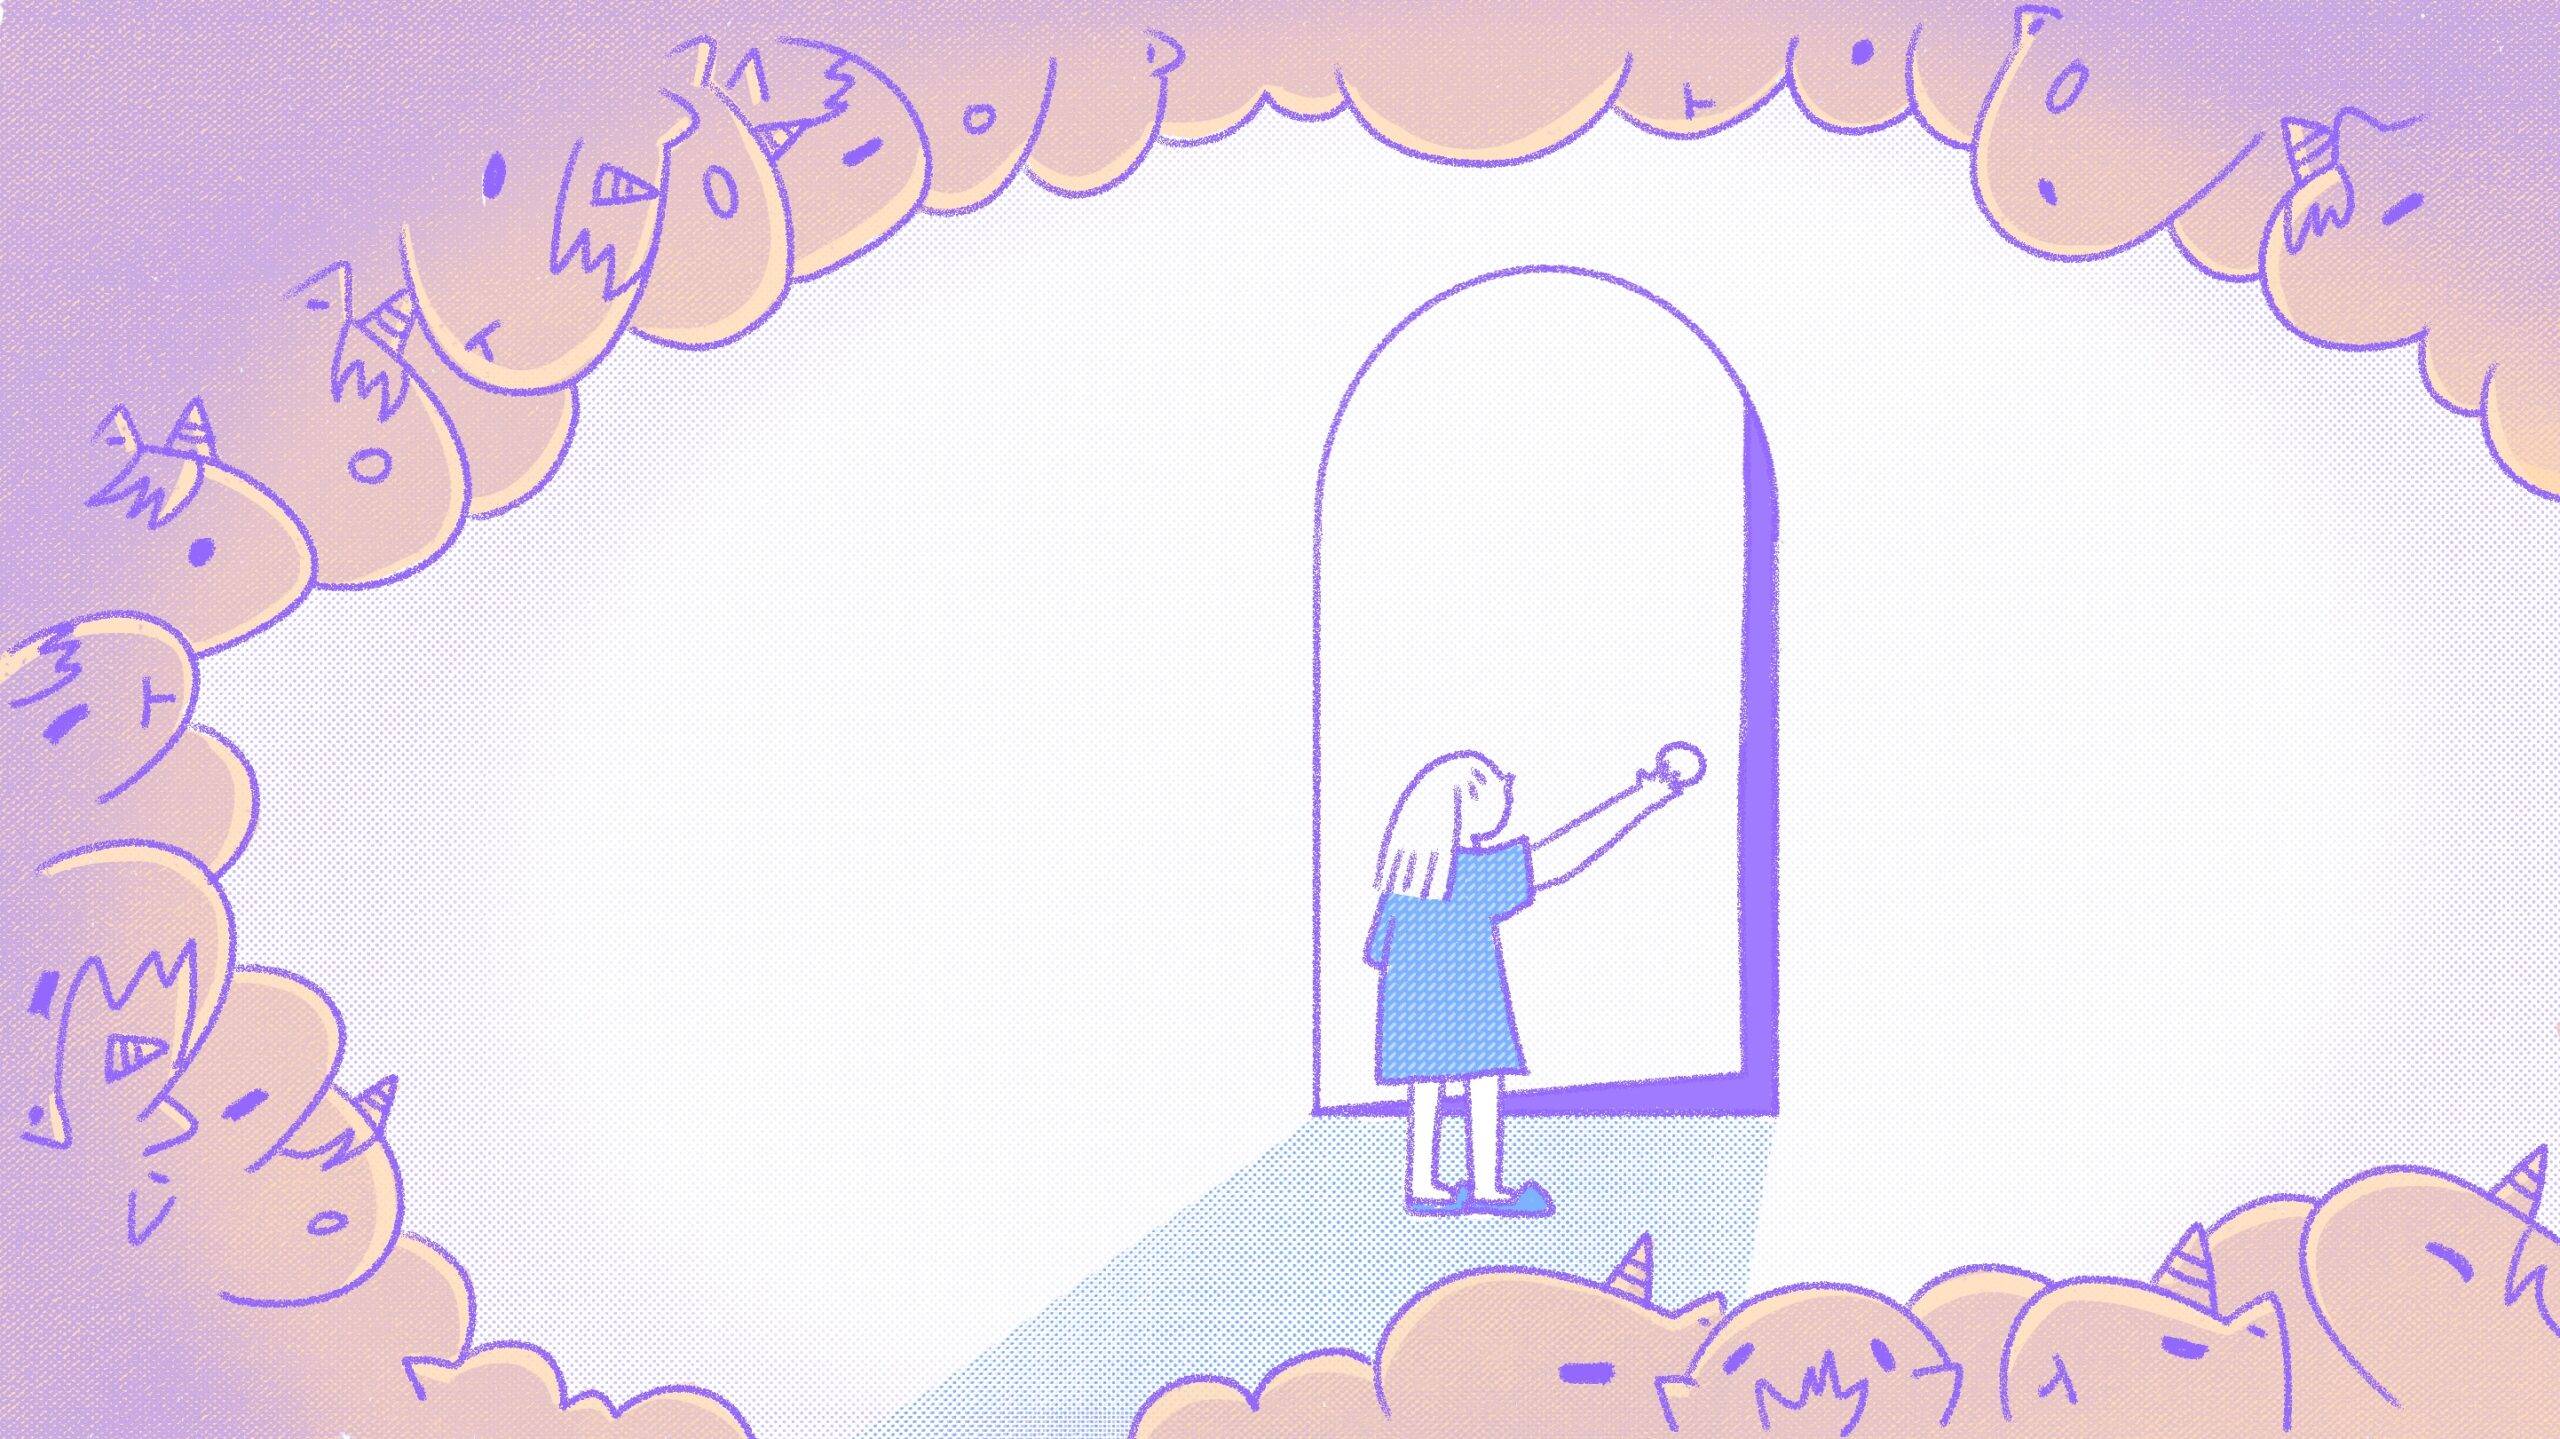 An illustration of a young girl opening door that is much bigger than her. All around her is a cloud of many unicorns looking at her.